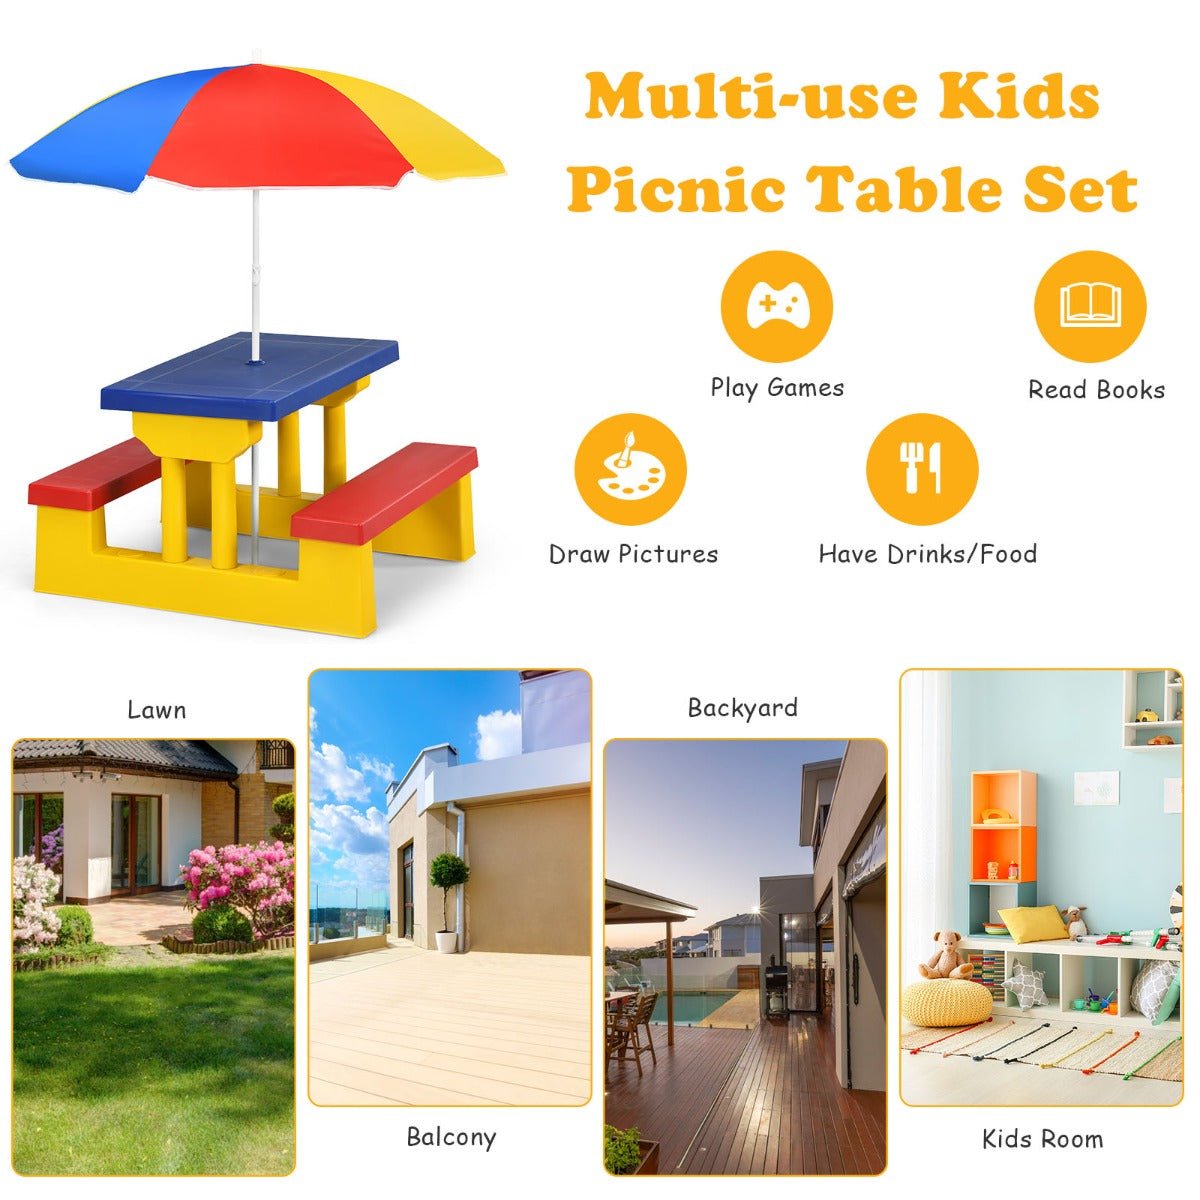 Playful Kids Outdoor Table: Unveil Fun and Sunlit Delights with Umbrella